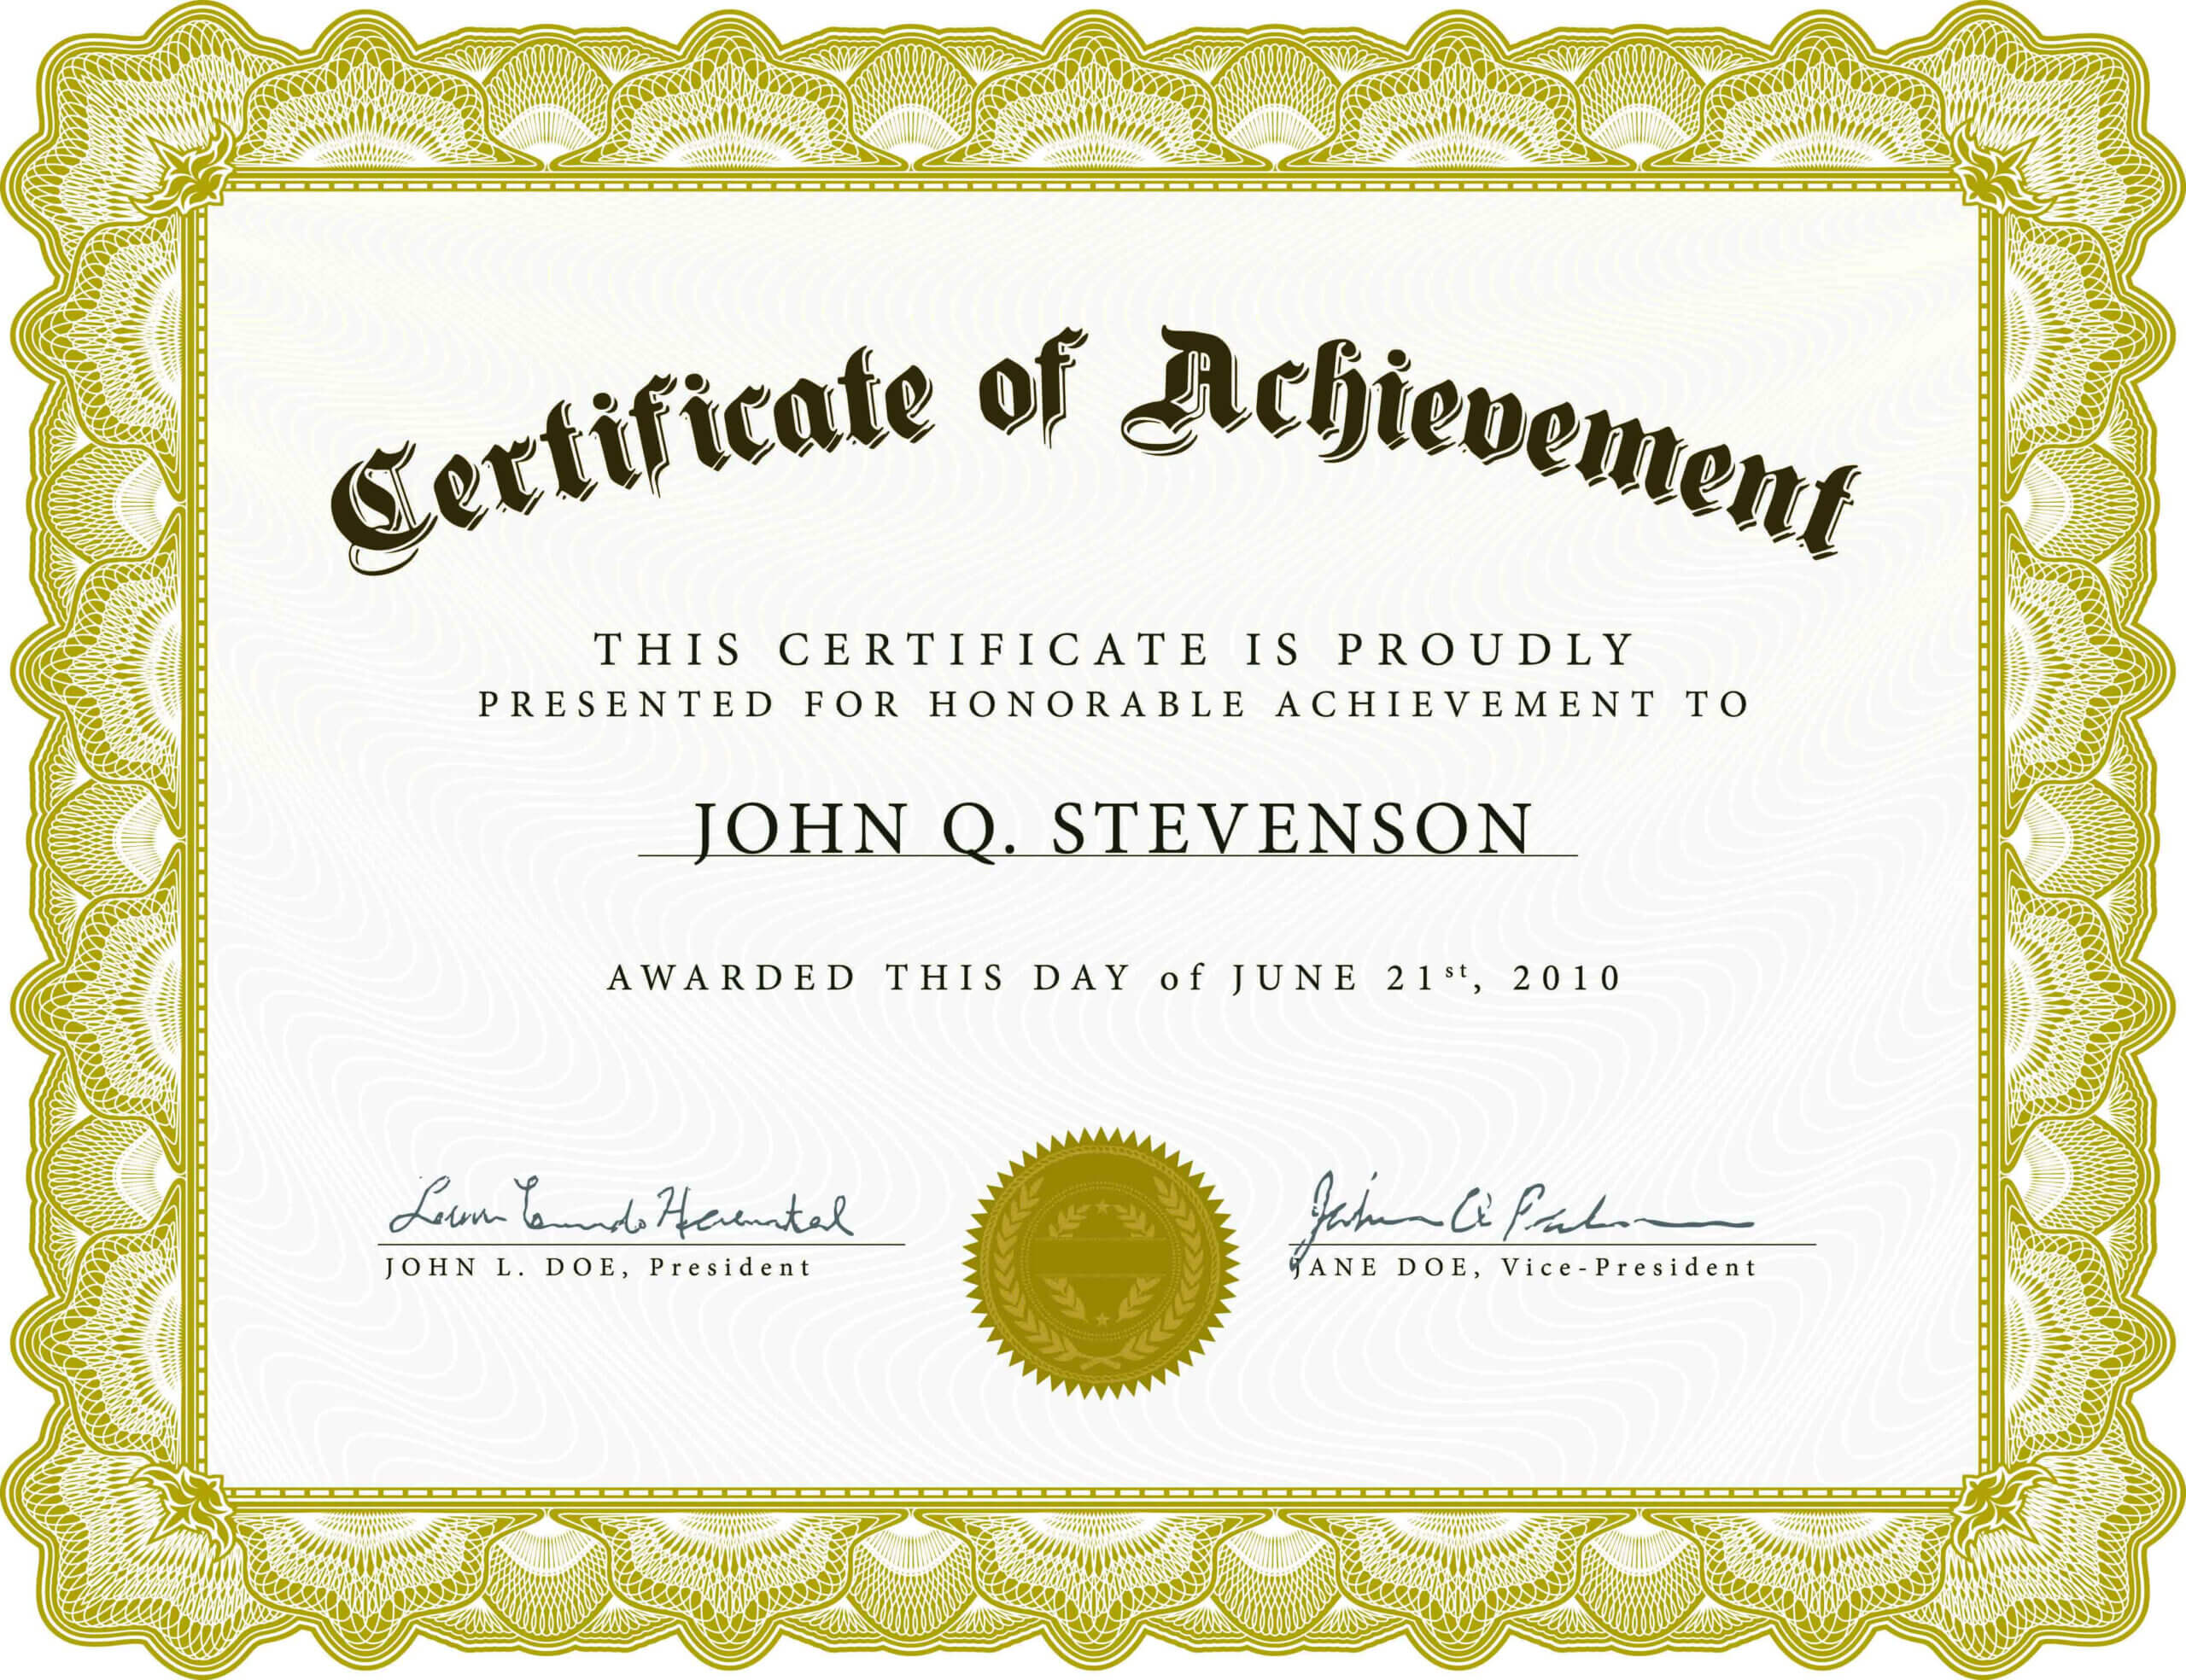 Certificate Of Academic Achievement Template | Photo Stock In Professional Certificate Templates For Word